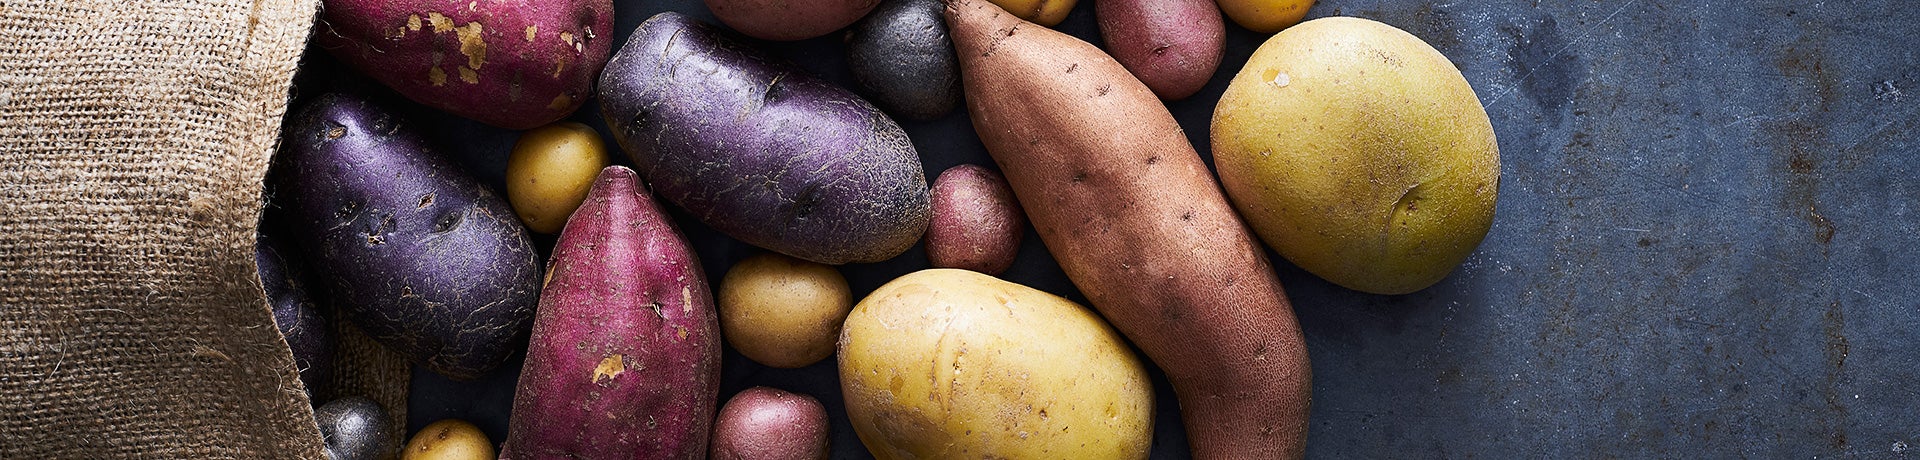 5 Kinds of Potatoes and How to Enjoy Them | WW (Weight Watchers) USA